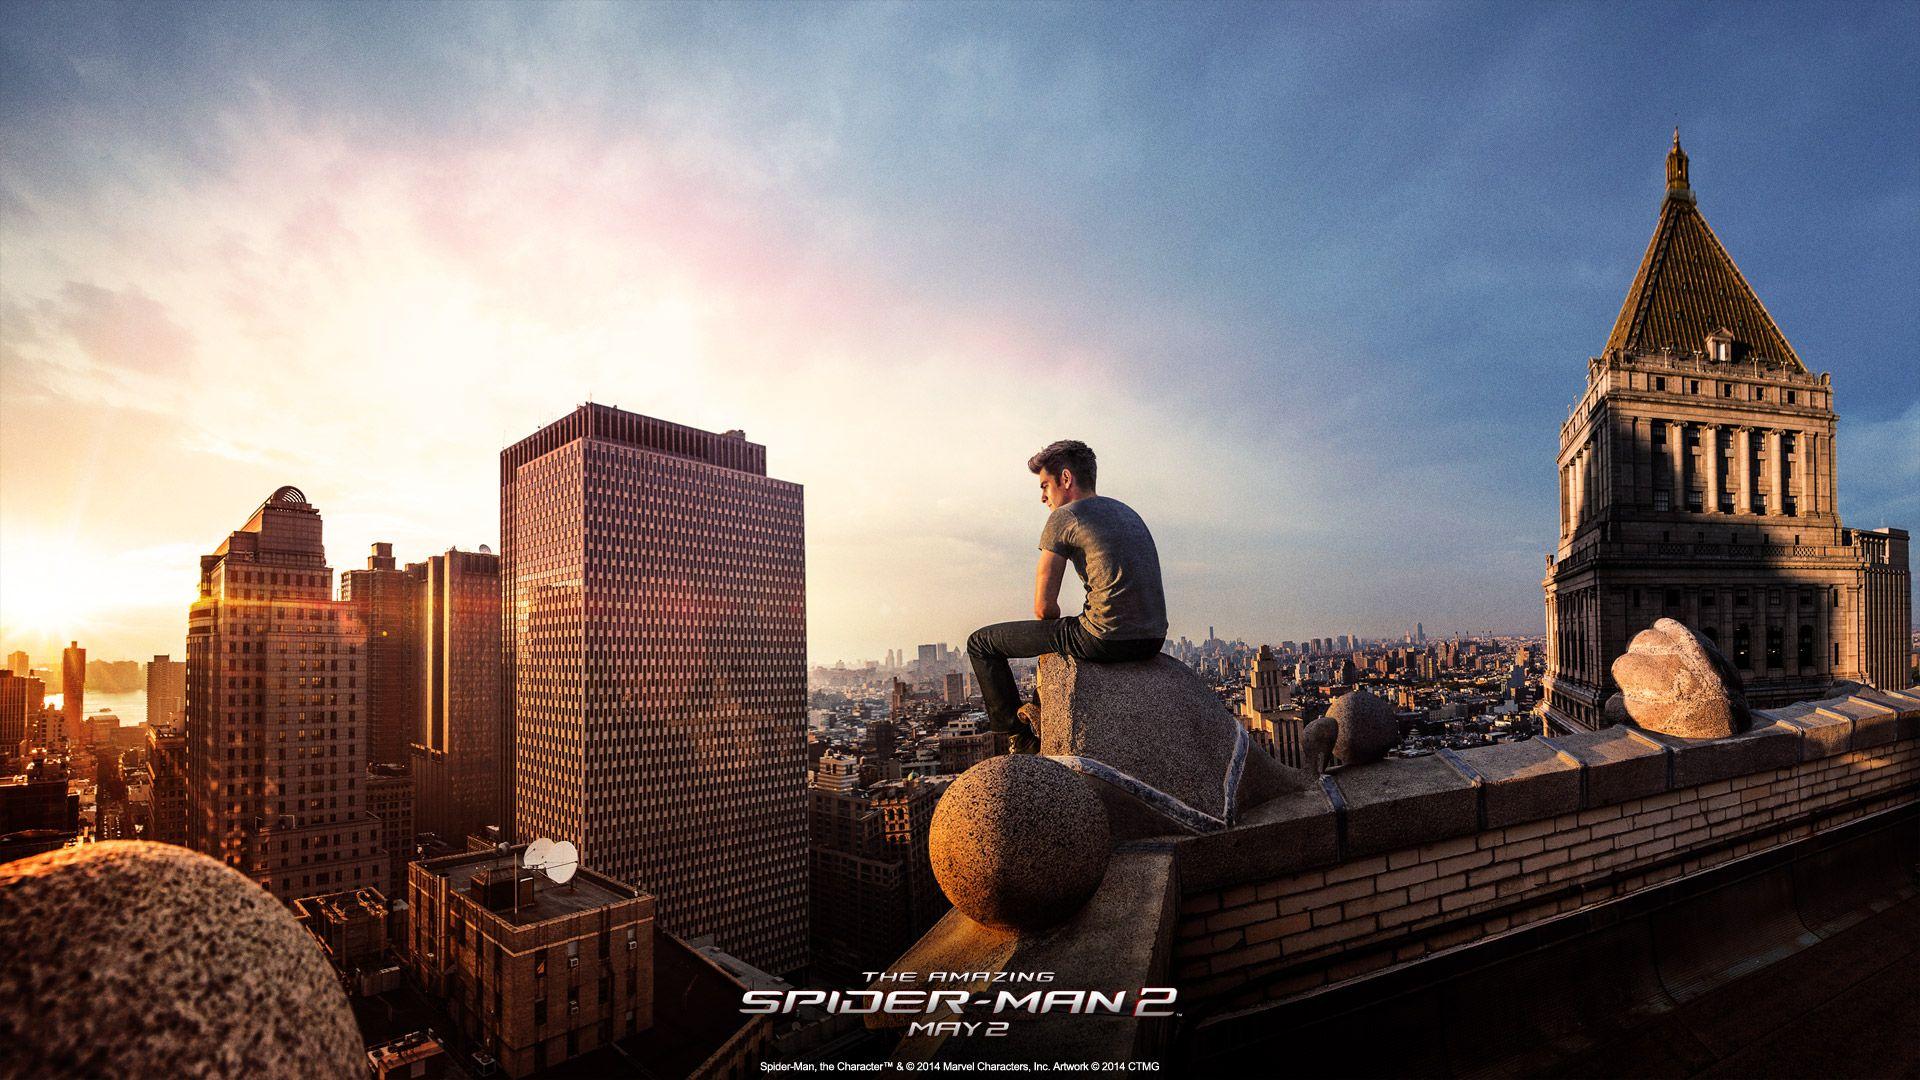 The Amazing Spider-Man Wallpapers - Top Free The Amazing Spider-Man